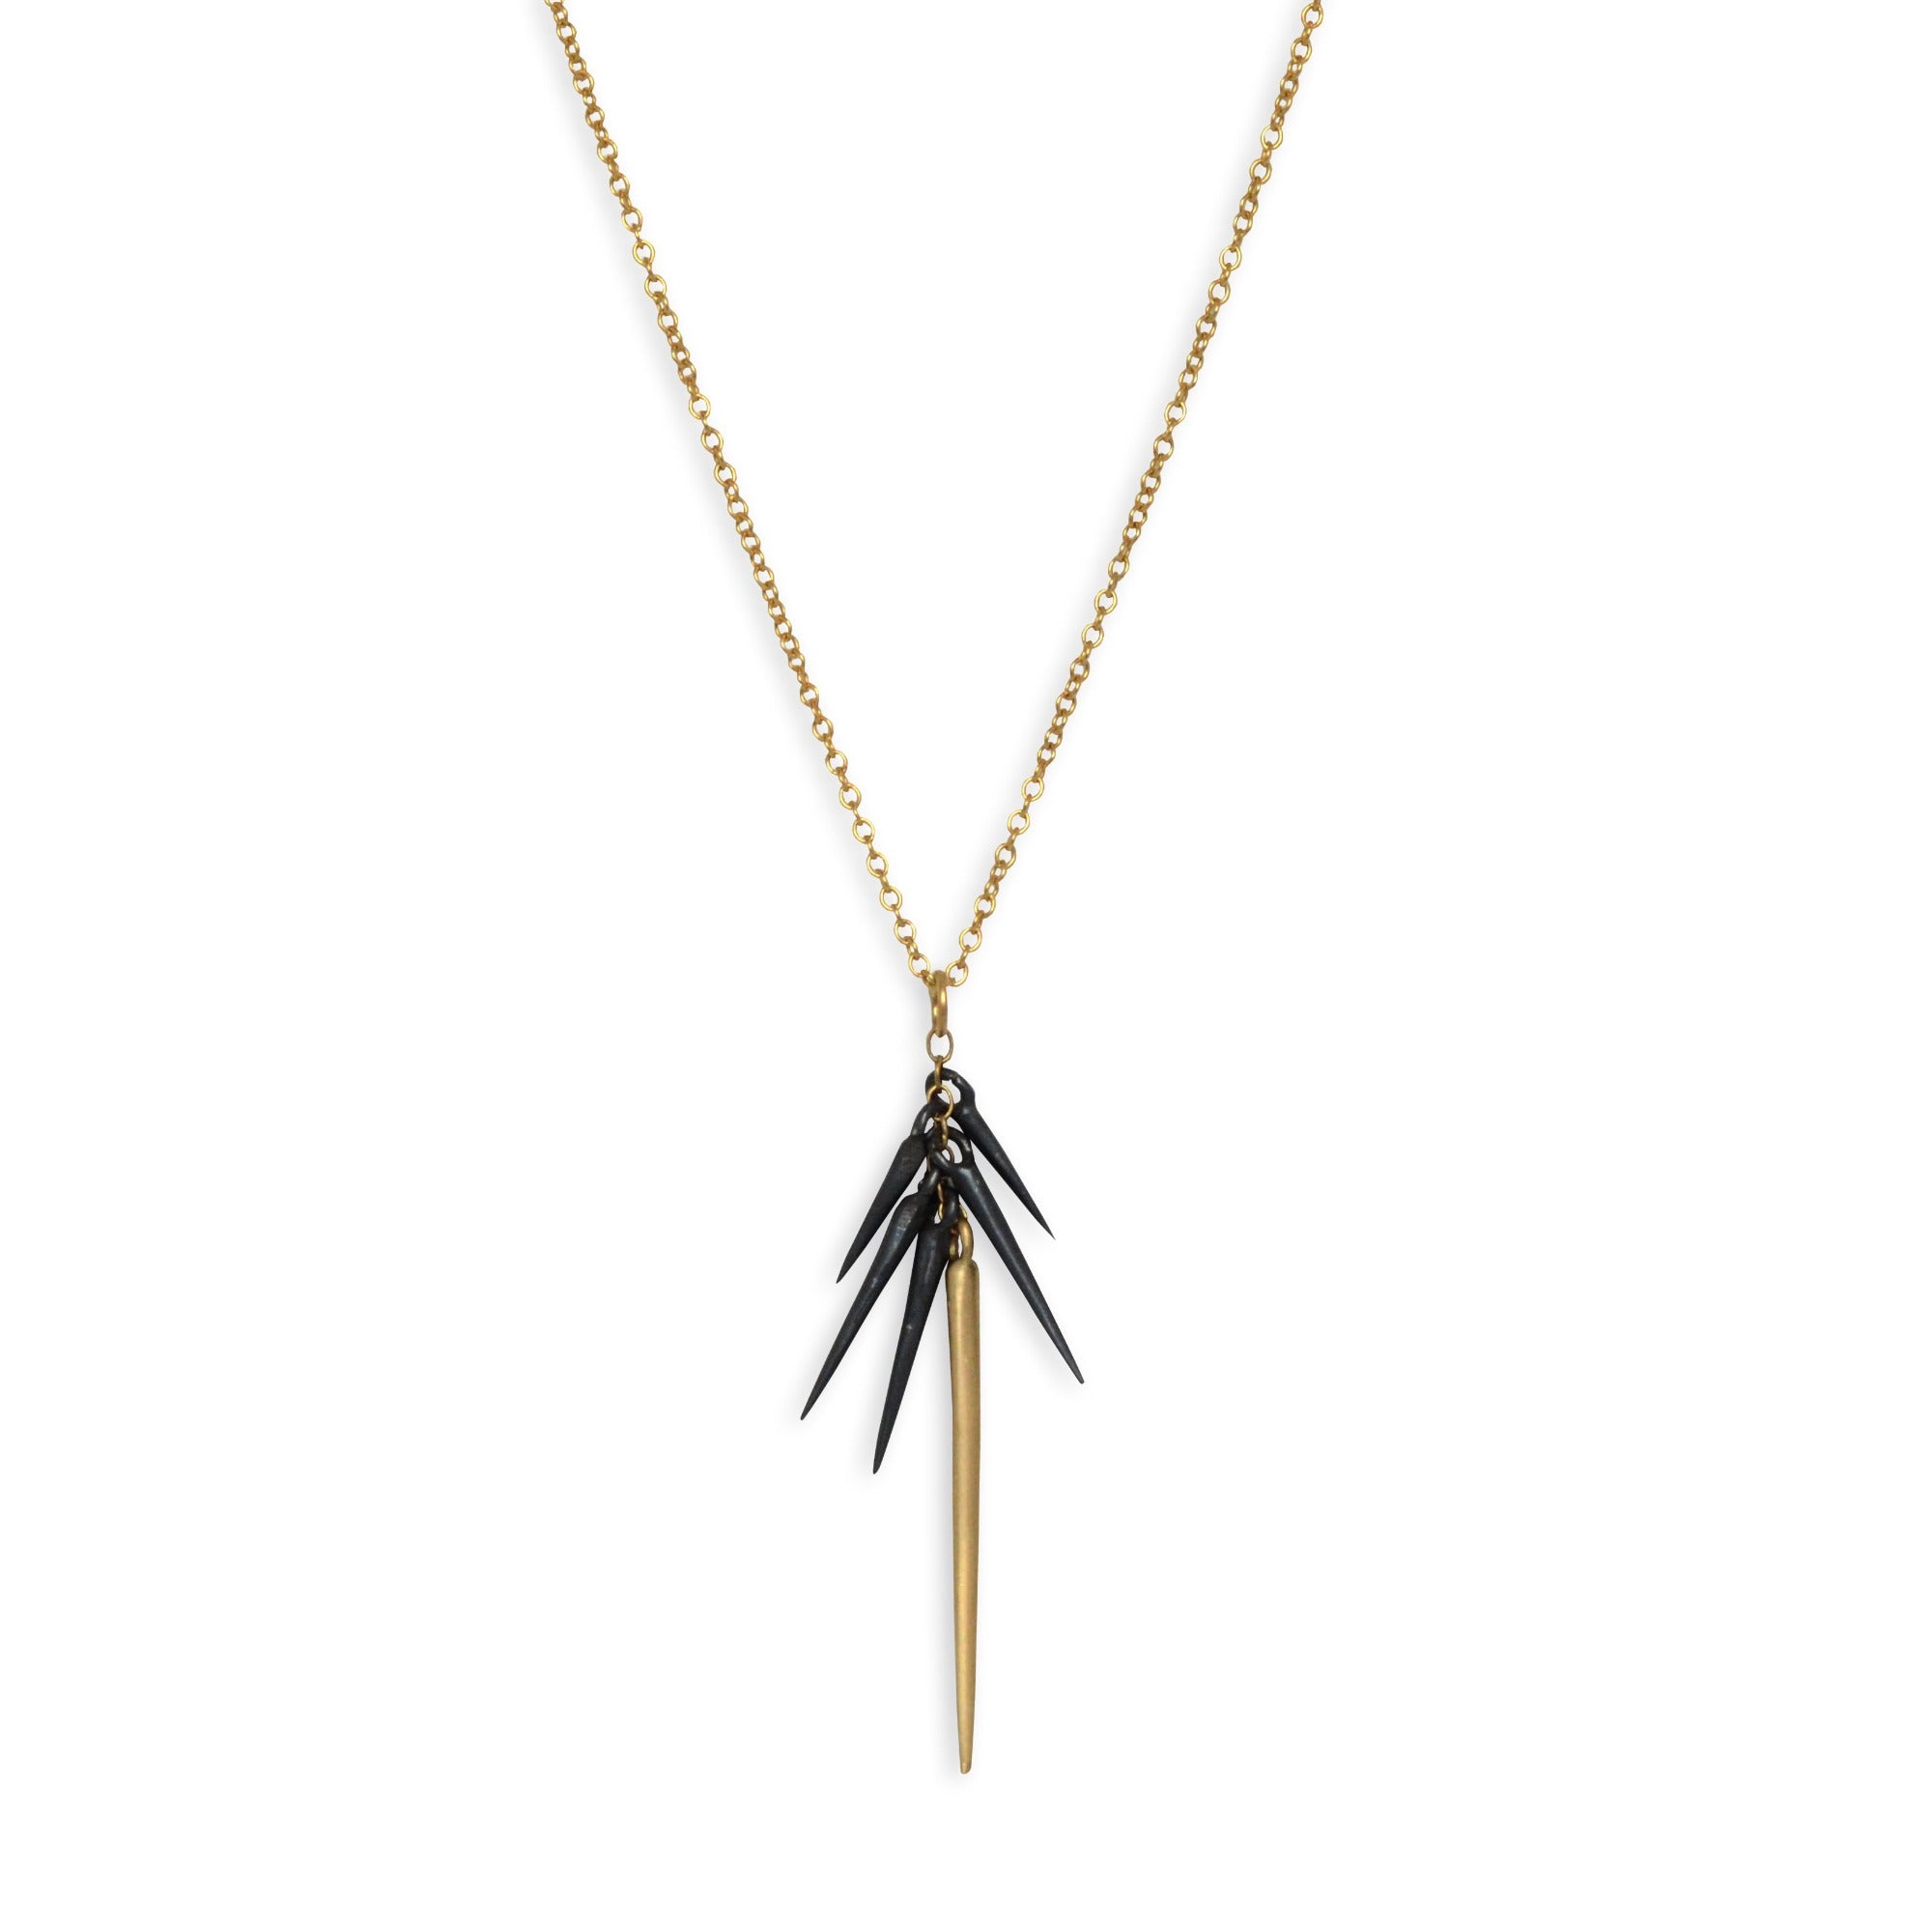 14k yellow gold/oxidized silver small point cluster necklace